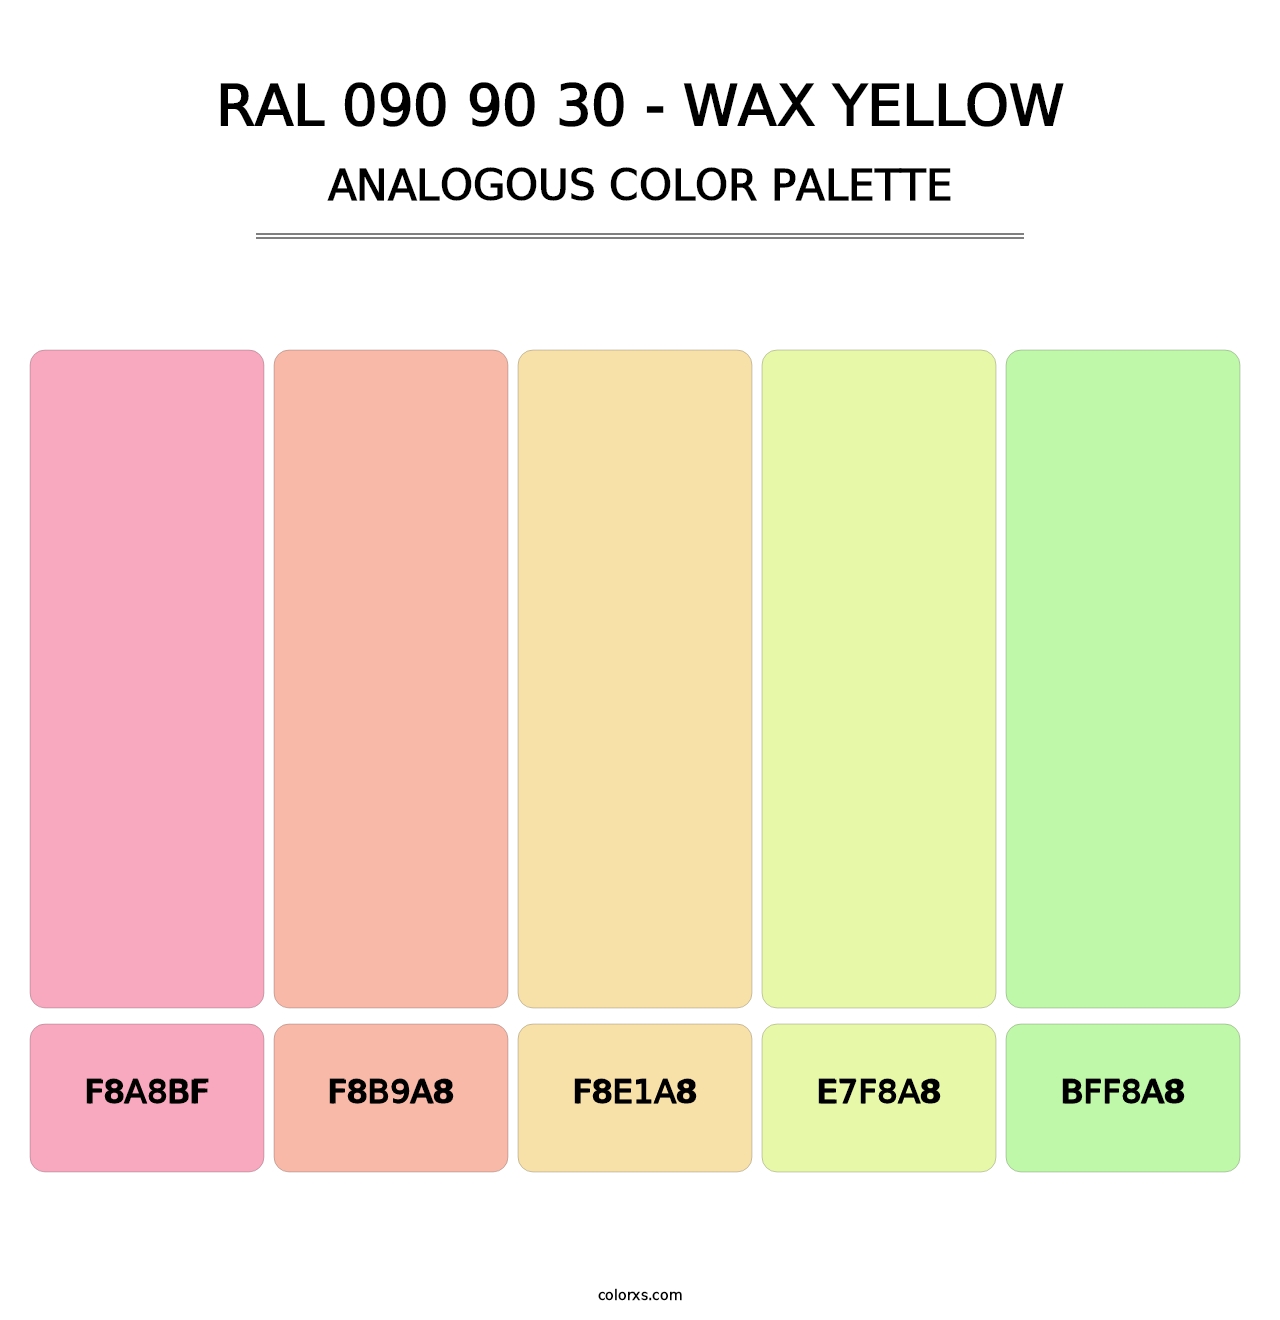 RAL 090 90 30 - Wax Yellow - Analogous Color Palette